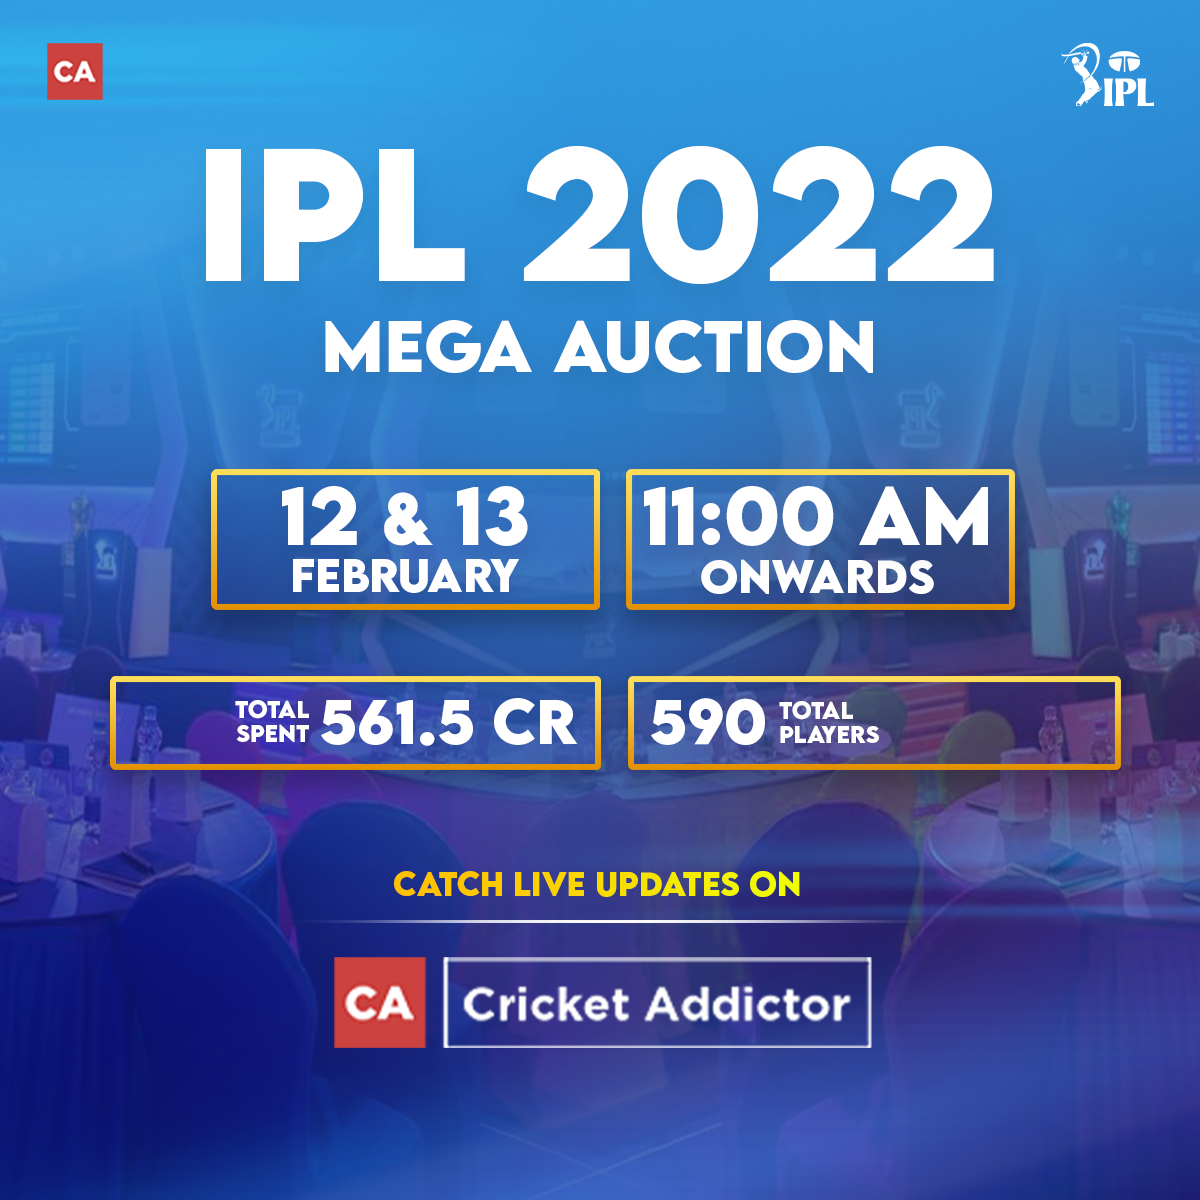 IPL Auction 2022 Live Streaming When And Where To Watch IPL Auction 2022 Live In Your Country?